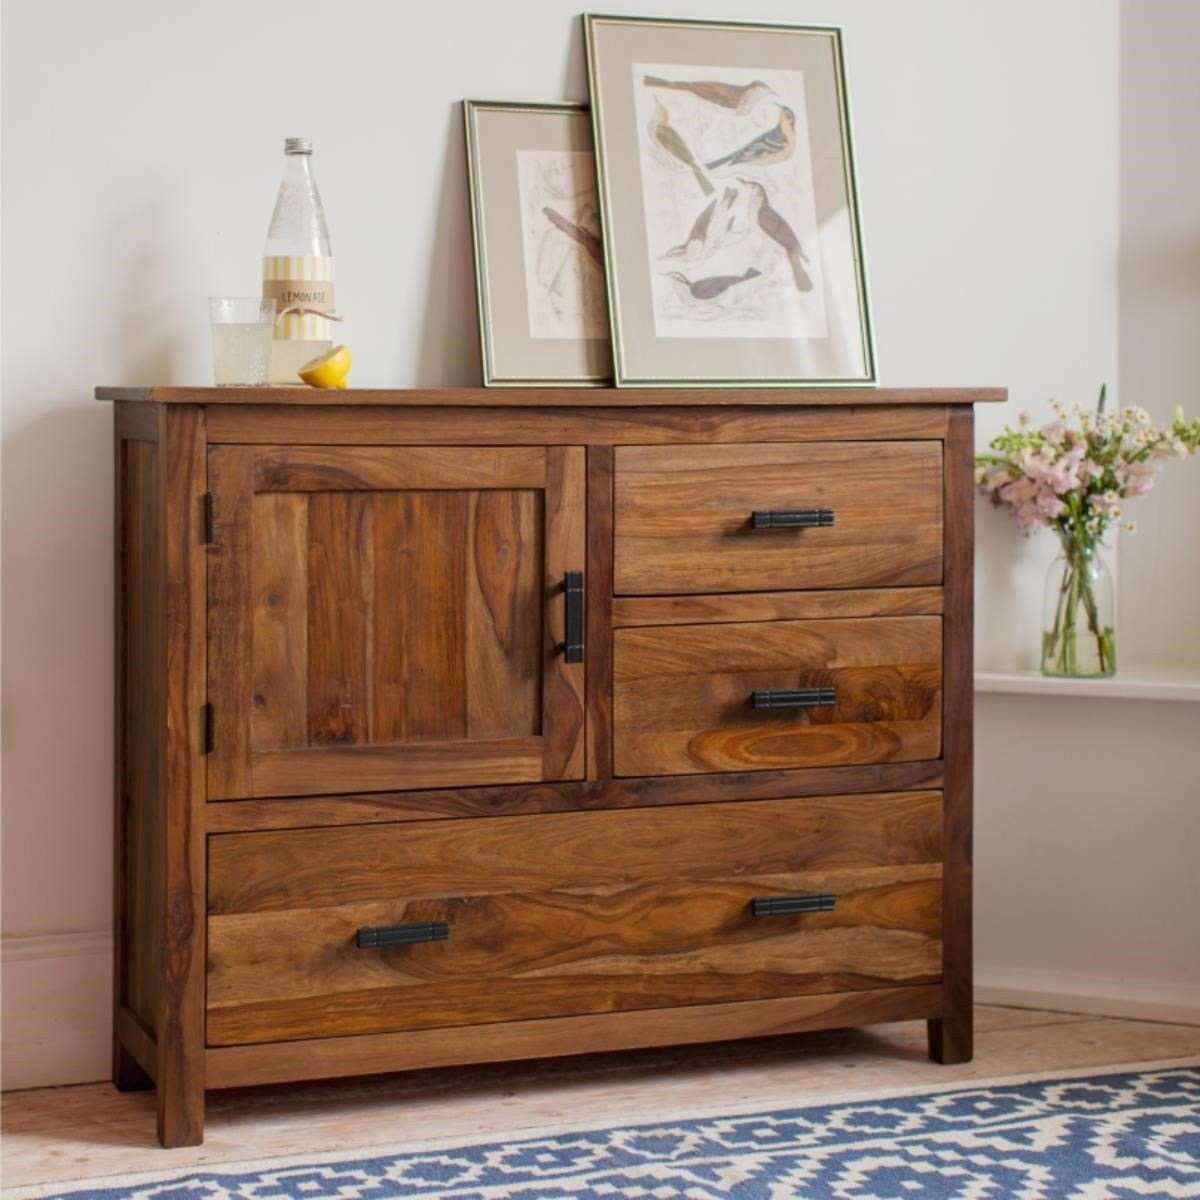 Jett Sheesham Wood Sideboard Cabinet For Living Room Furniture 3 Drawers 1 Cabinet  Storage Natural Honey Finish – Shagun Arts In Wood Cabinet With Drawers (Photo 13 of 15)